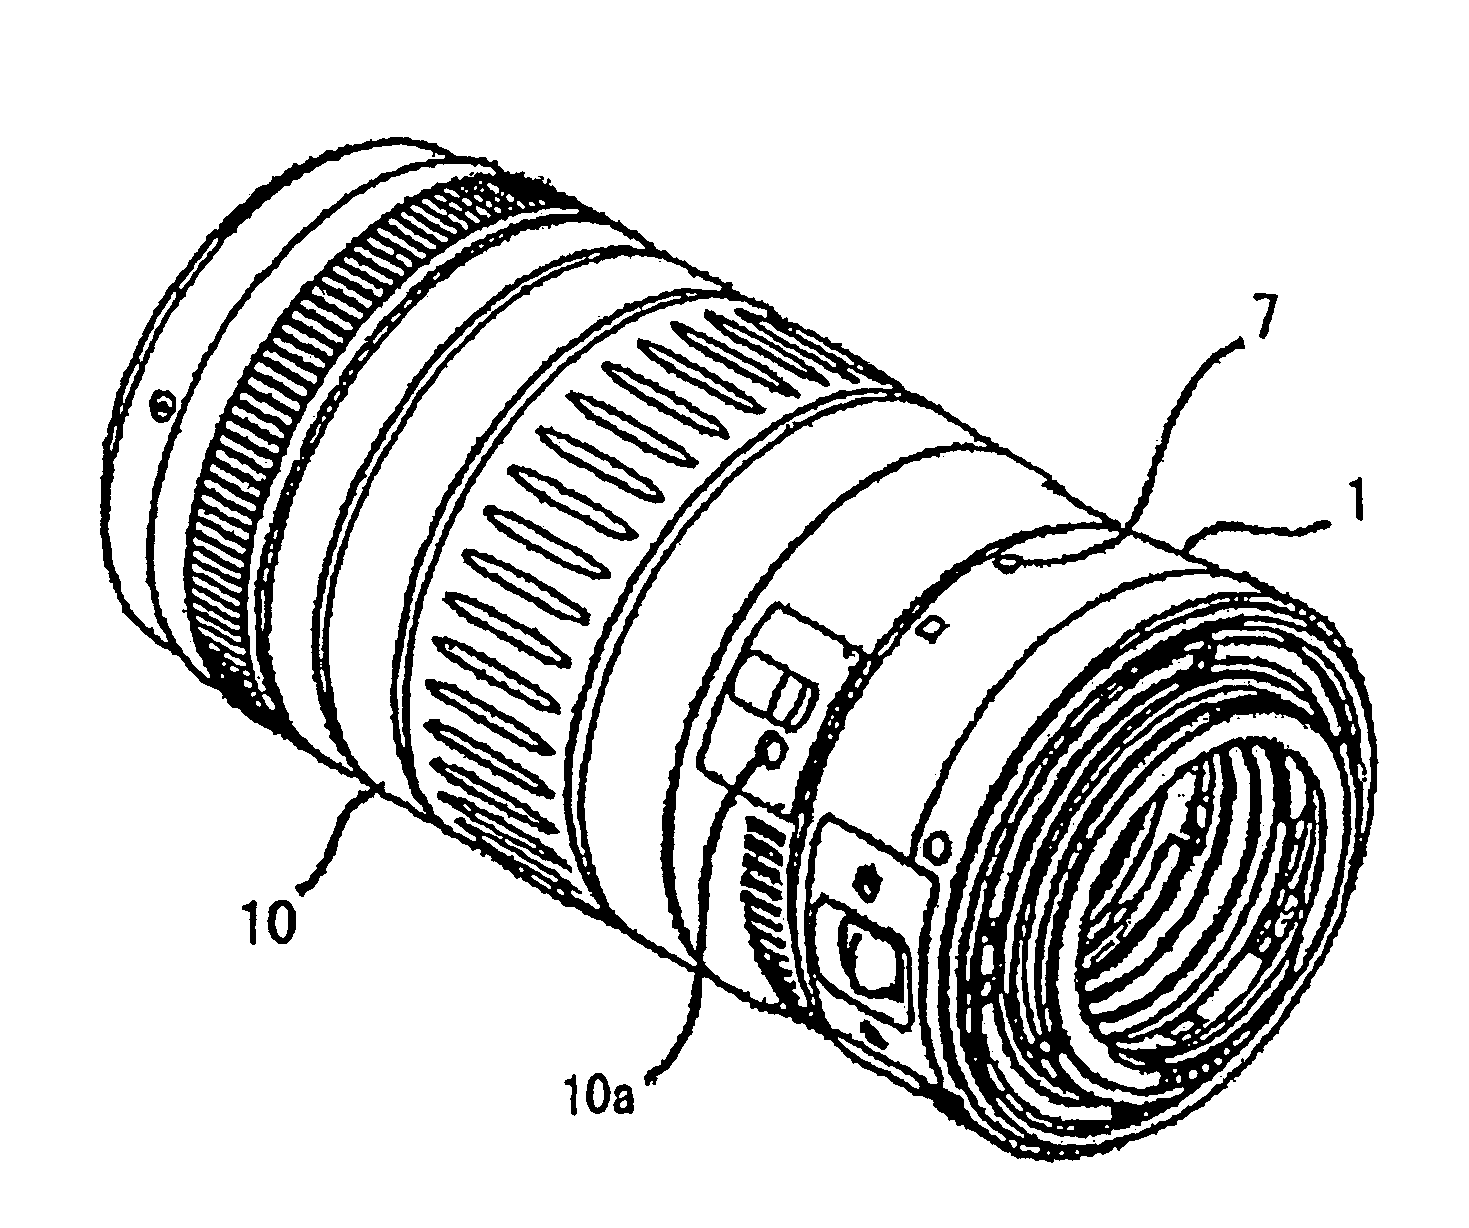 Intermediate adapter and camera system